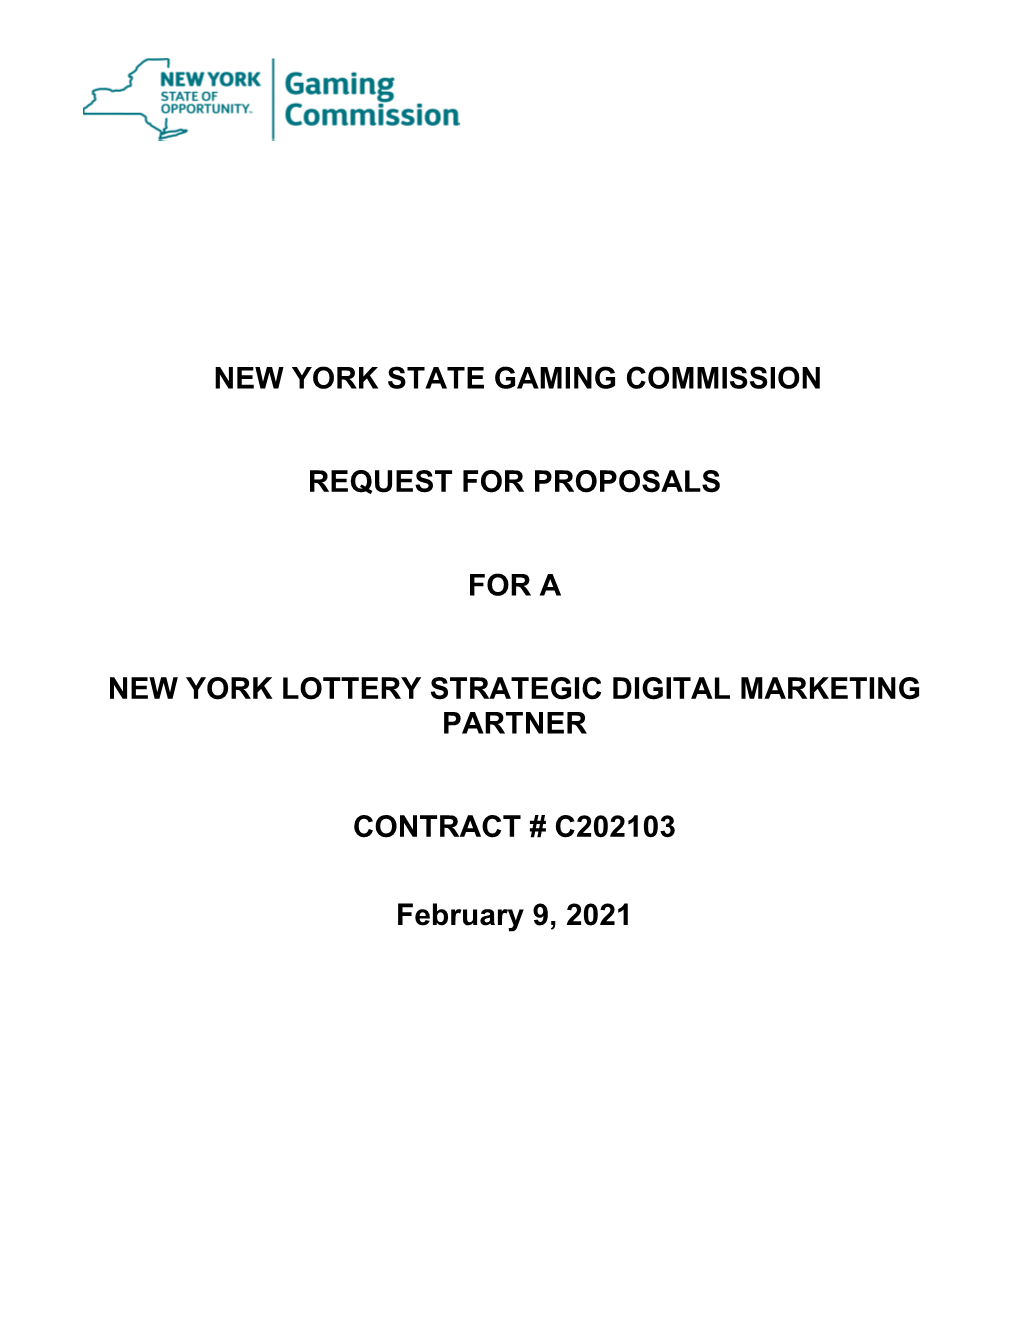 New York State Gaming Commission Request For